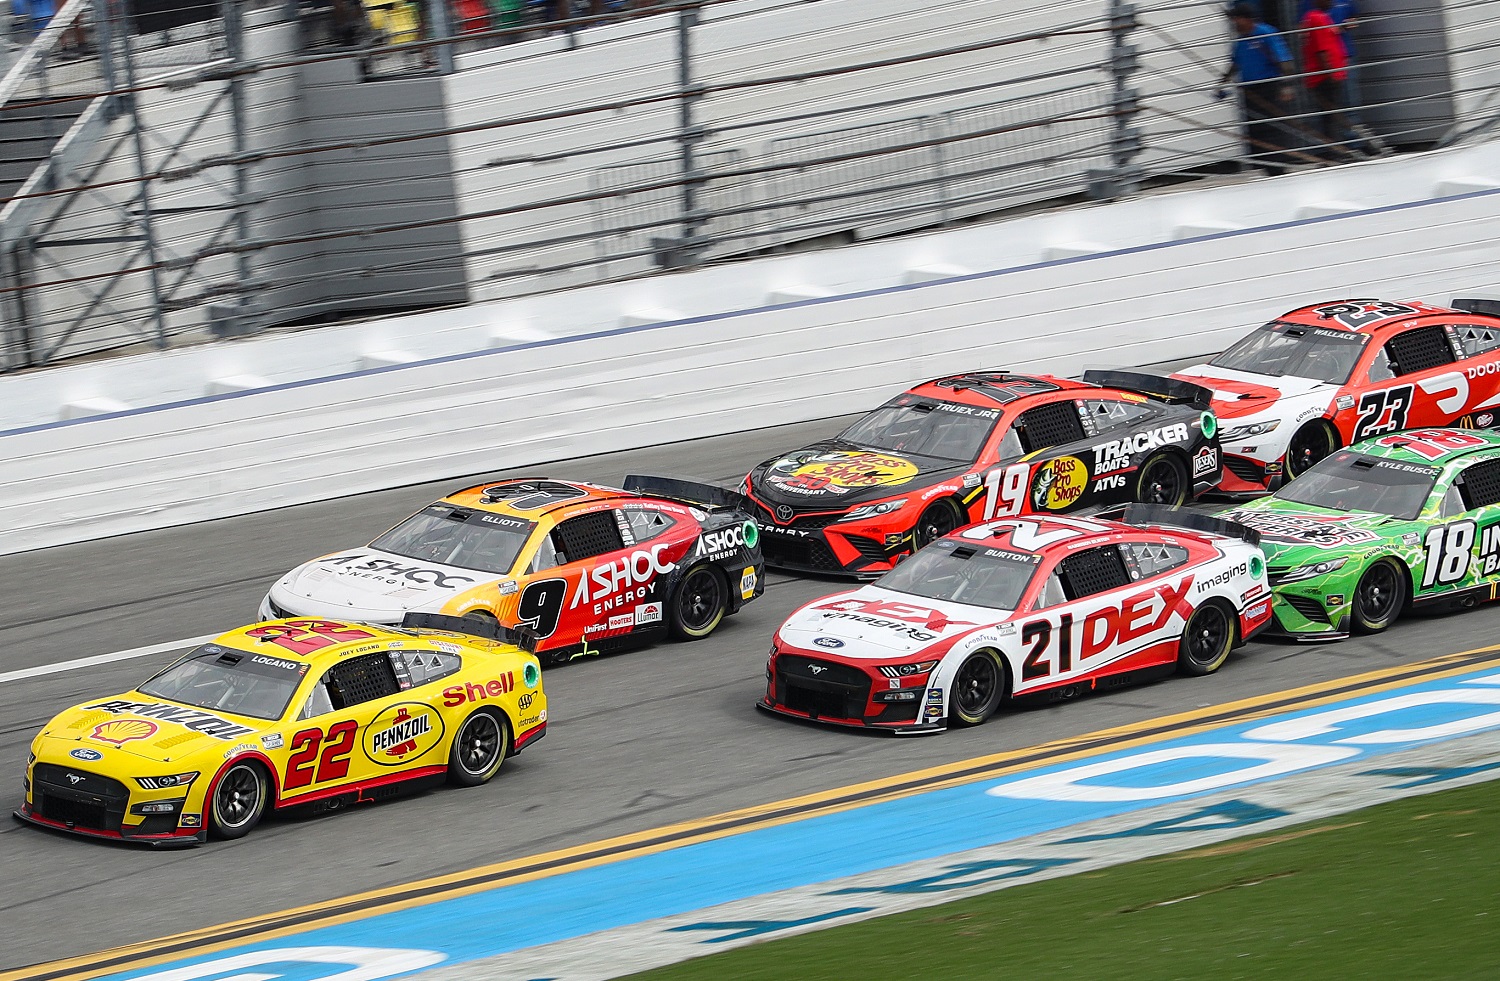 Joey Logano leads the field during the NASCAR Cup Series Coke Zero Sugar 400 at Daytona International Speedway on Aug. 28, 2022.